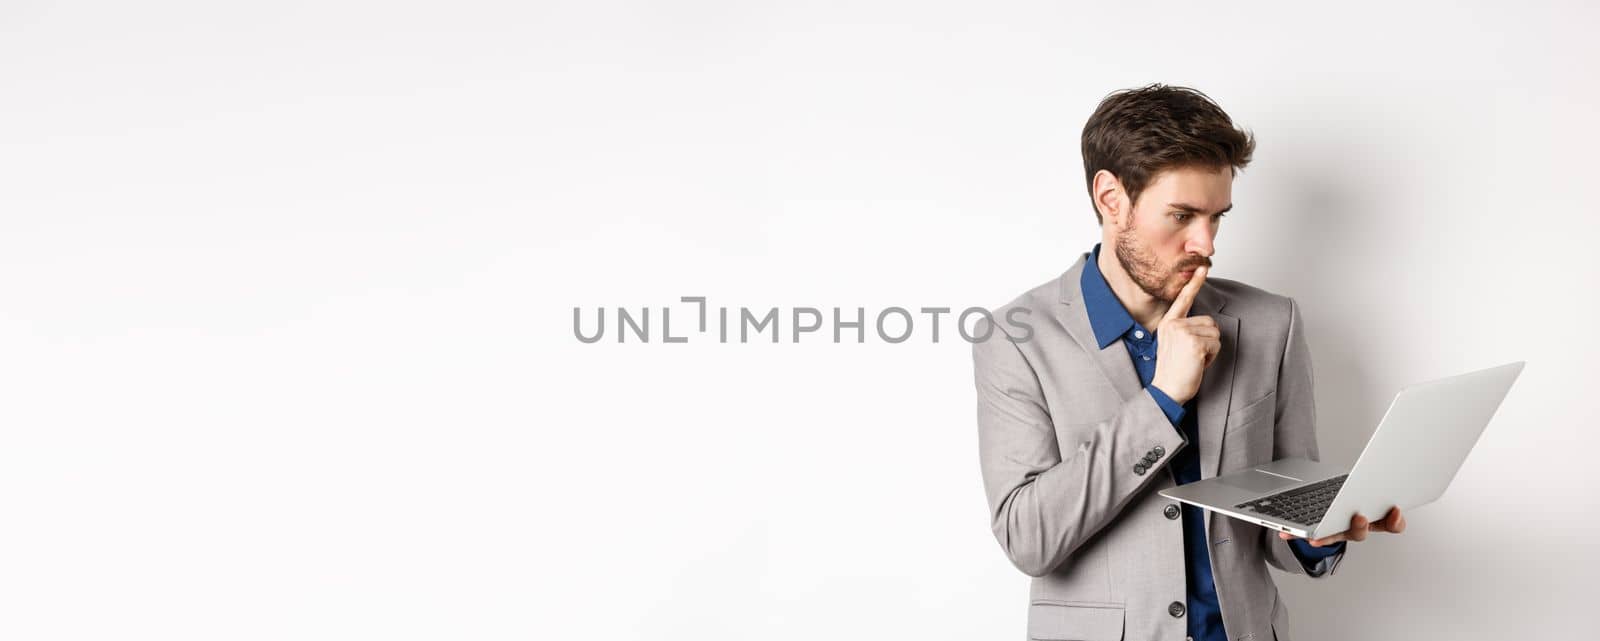 Pensive businessman working on laptop and thinking, looking thoughtful at computer screen, standing in suit on white background.